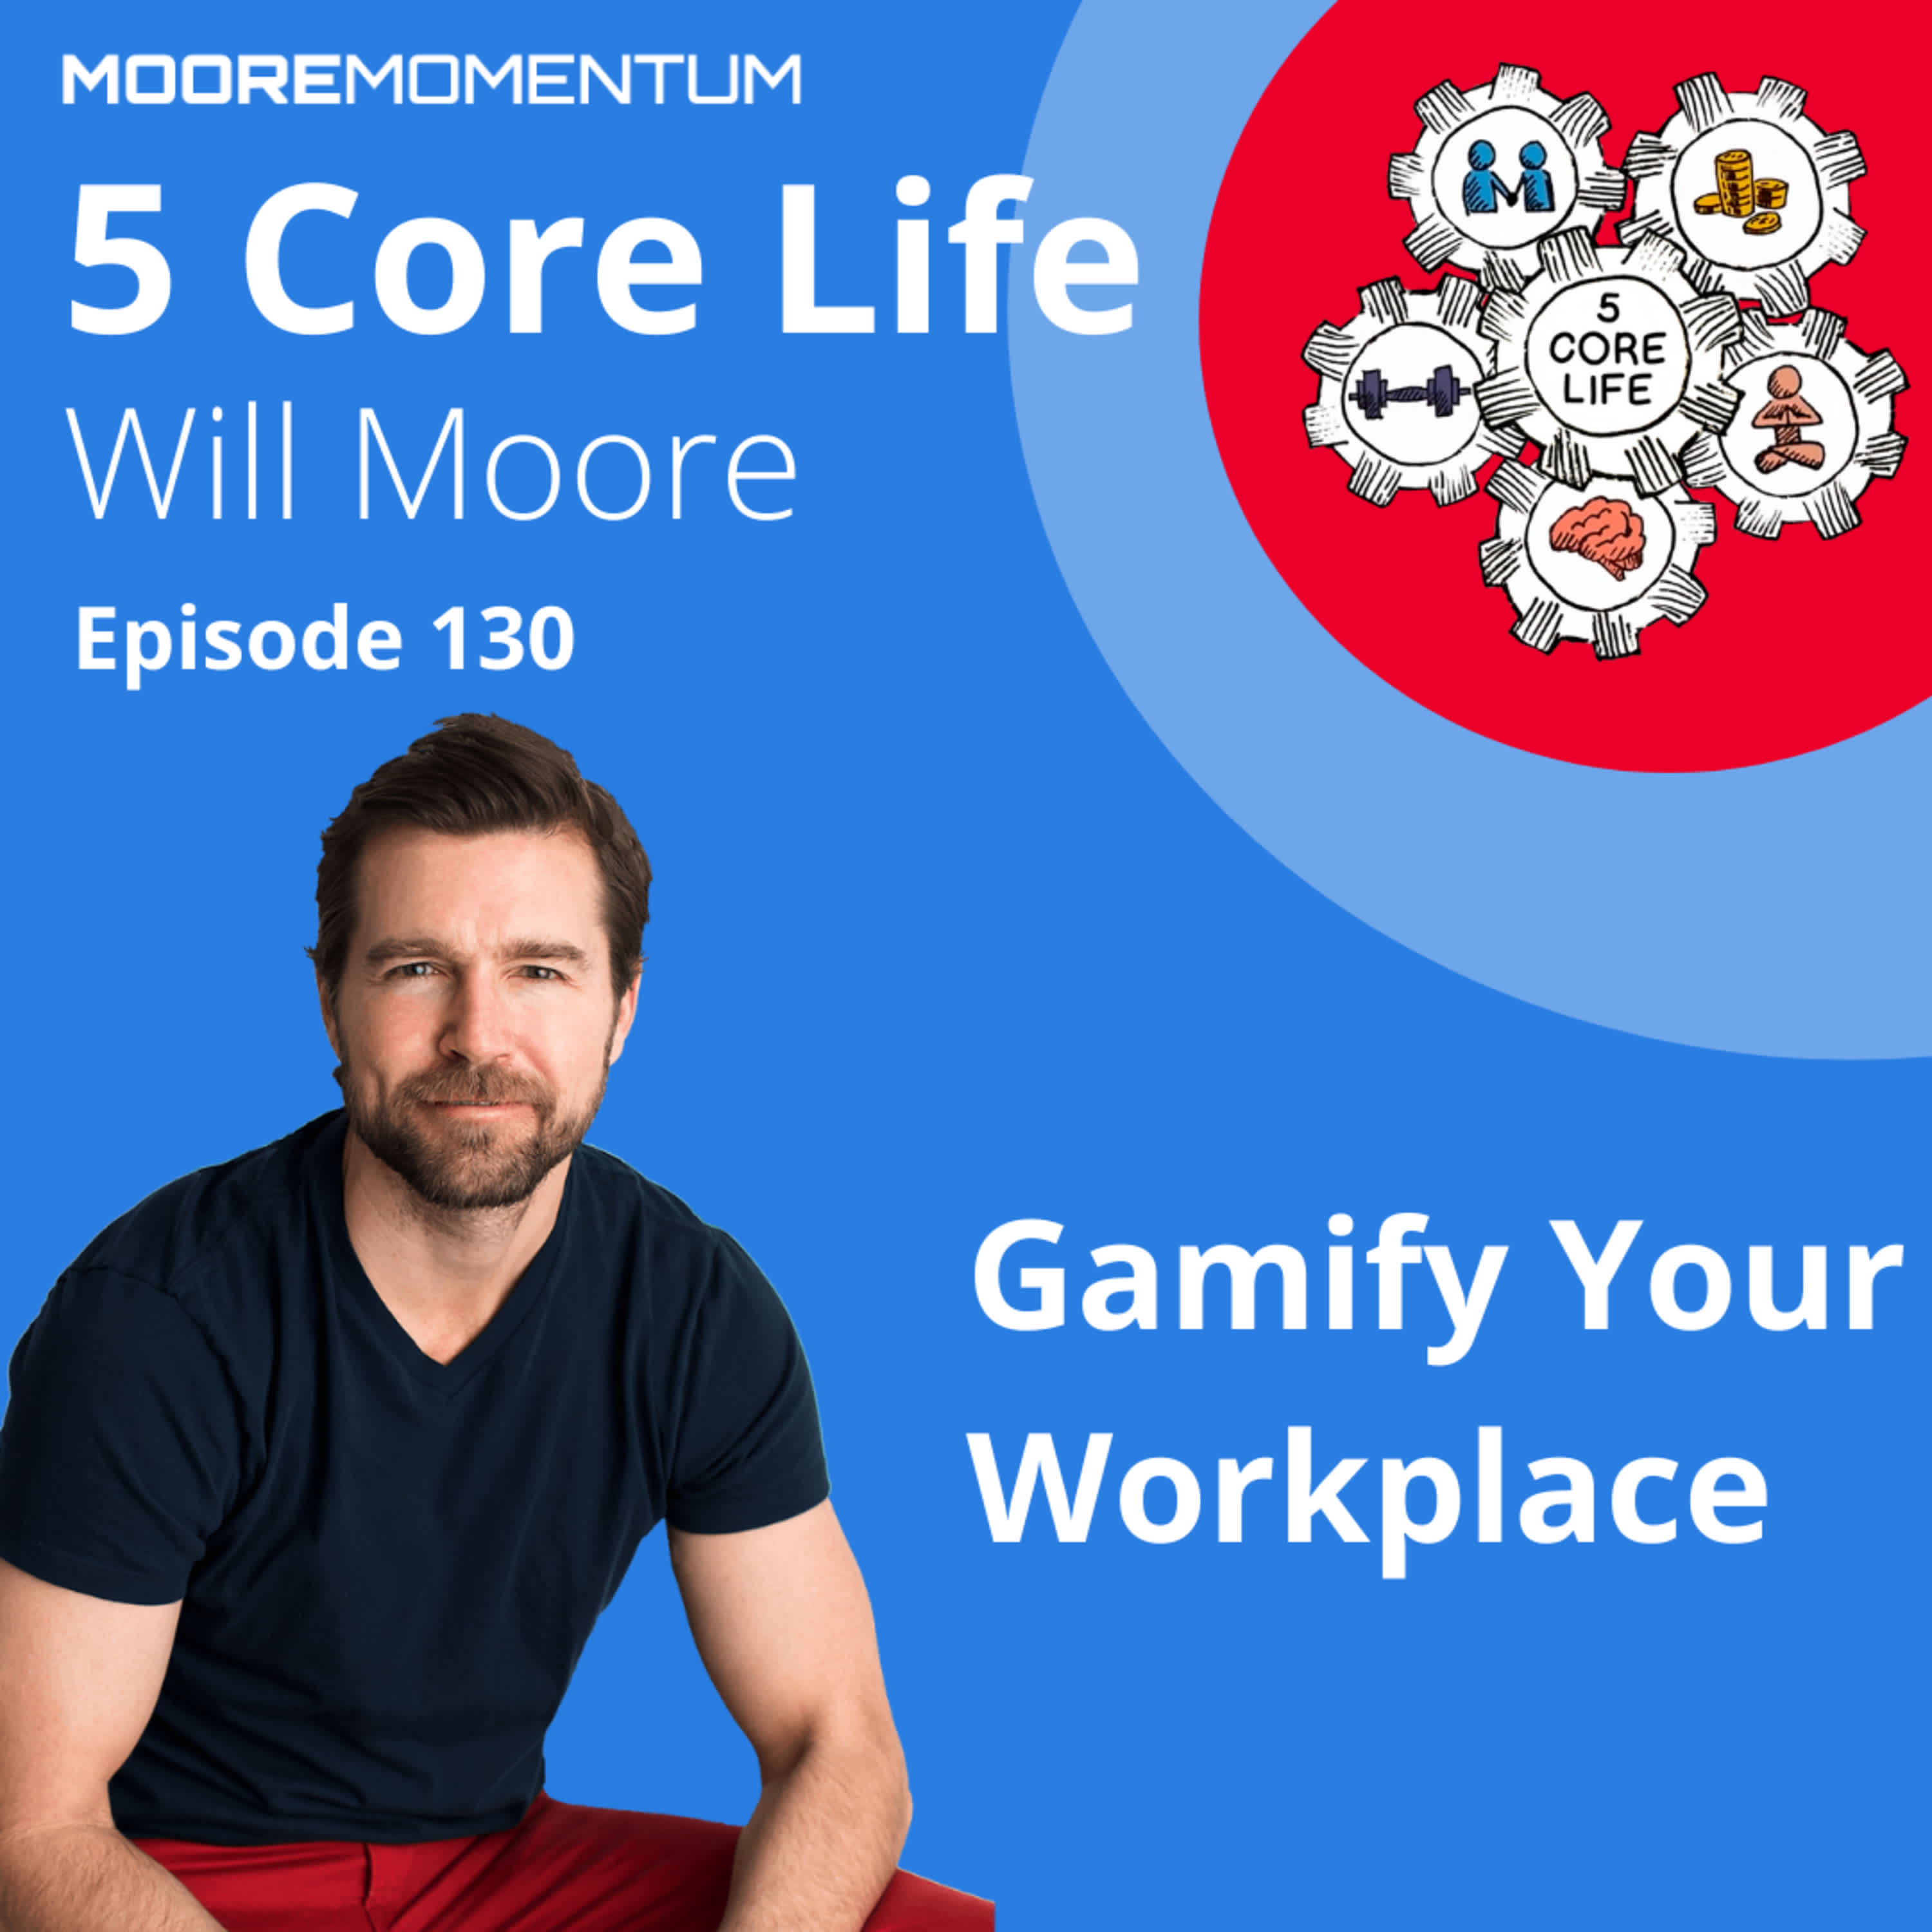 Hybrid Work from Home, Gamify Your Workplace, 2021 Working Habits, Gamify Your Work Habits